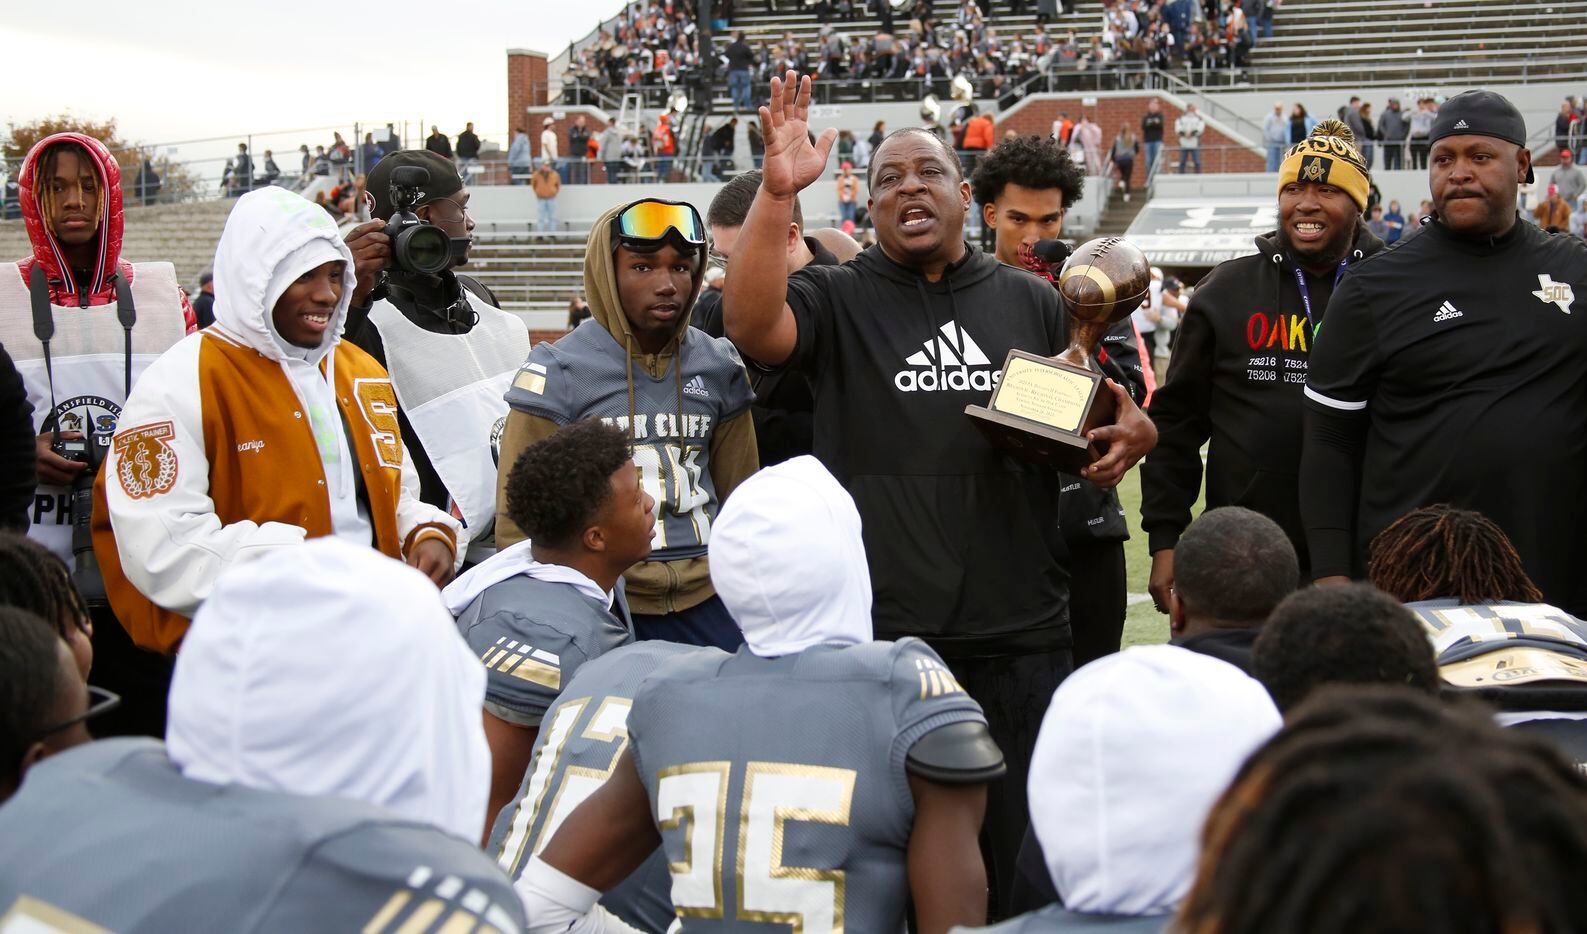 South Oak Cliff head coach Jason Todd speaks with his players after being presented the Class 5A Division ll Regional Championship trophy following the team's 33-28 victory over Aledo to advance. The two teams played their Class 5A Division ll Region ll semifinal football game at Vernon Newsom Stadium in Mansfield on November 26, 2021. (Steve Hamm/ Special Contributor)